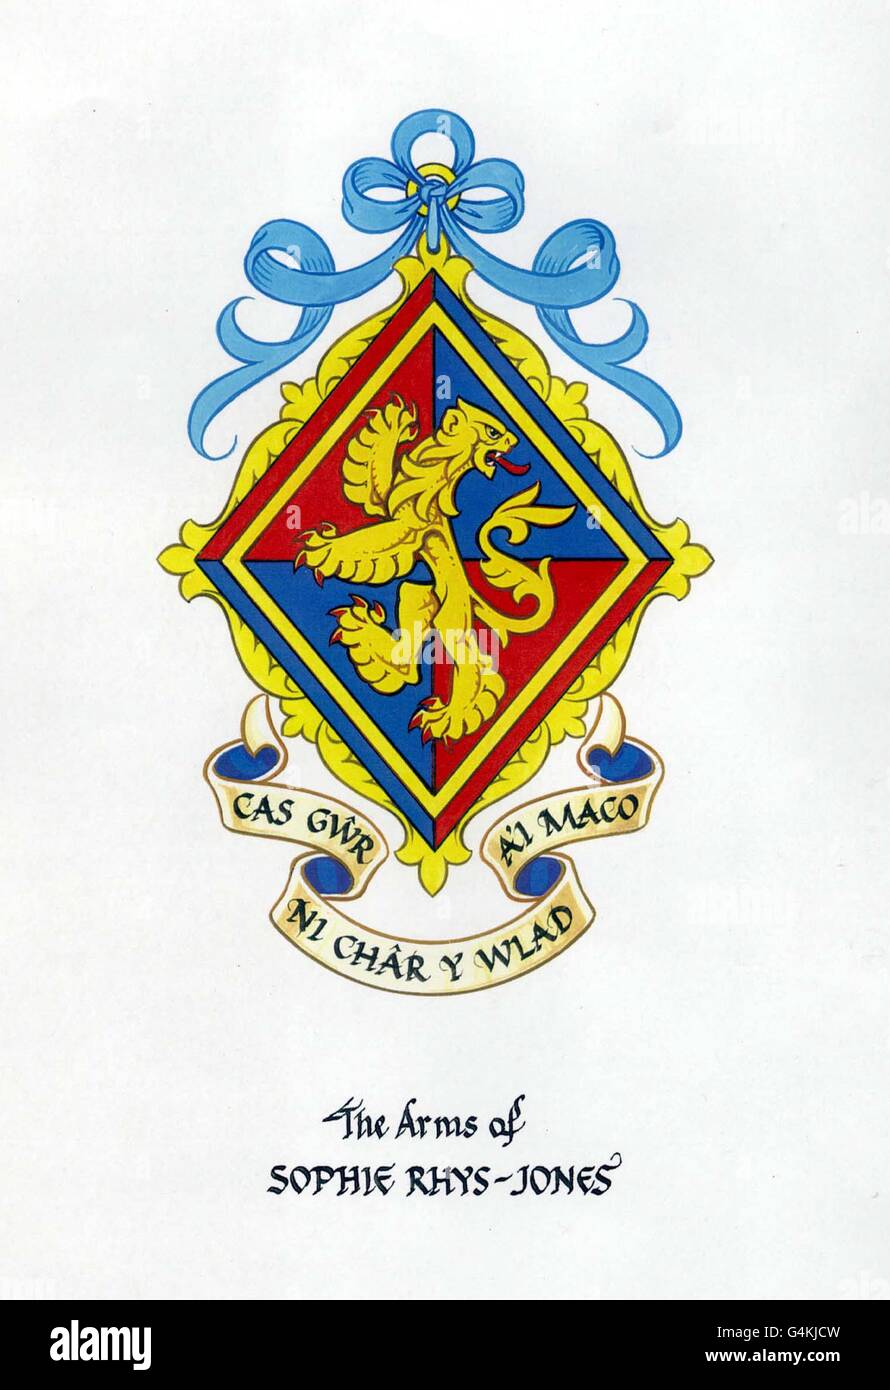 The new coat of arms for the family of Sophie Rhys-Jones, the fiance of Britain's Prince Edward. Sophie Rhys-Jones said that her family's new coat of arms was 'wonderful'. The new look design incorporates all the elements of her family's previous coat of arms. * It shows the Rhys-Jones' noble descent from Wales and retains the family's ancient motto in Welsh, translating into 'Hateful the man who Loves not the Country that nurtured him'. A gold lion is the main feature, shown on a diamond which is quartered into gules (red) and azure (blue), the colours of the Royal Fusiliers in which members Stock Photo